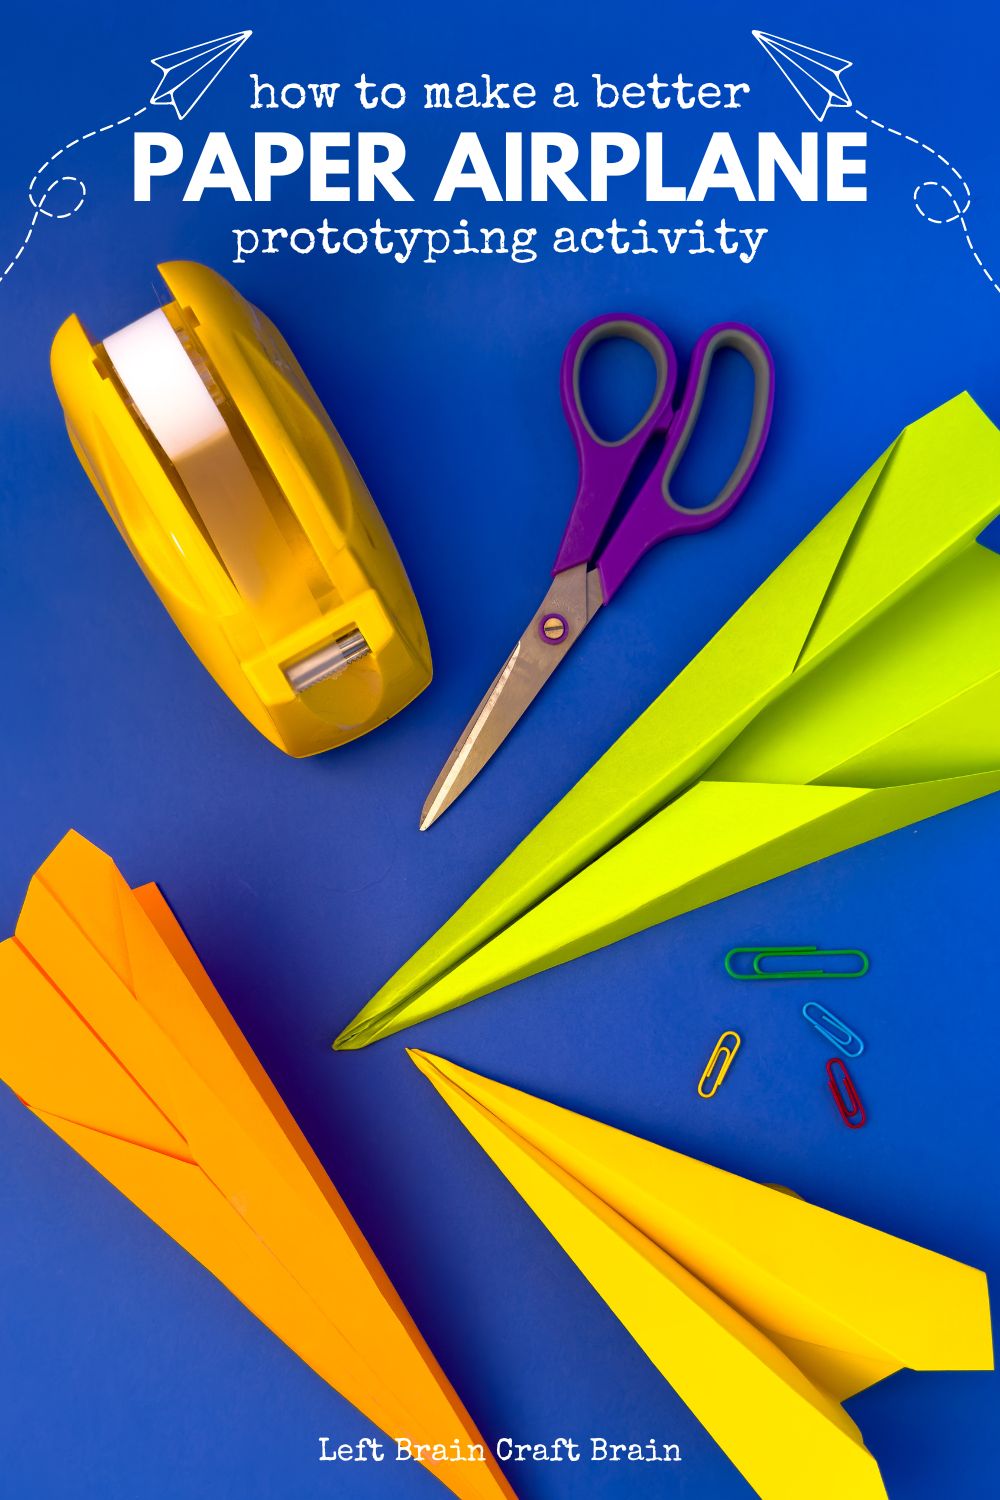 Learn how to make a better paper airplane with this fun engineering design process activity for kids. It's a budget-friendly STEM activity!